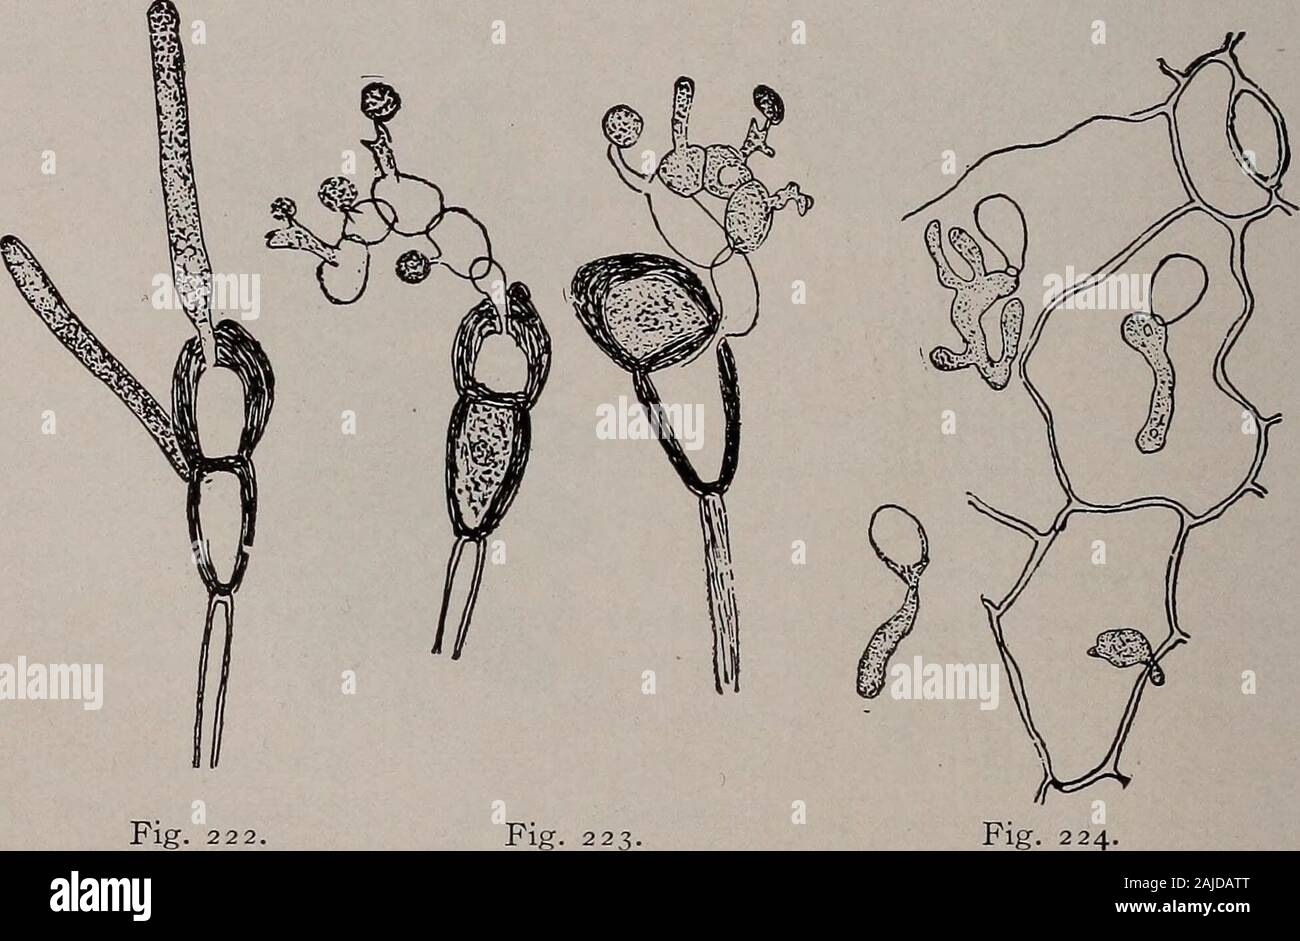 Elementary botany . 20. Fig. 221. Germinating uredospore of Germ tube entering the wheat rust. (After Marshall- leaf through a stoma.Ward.). Fig. 222.Teleutospore germi-nating, forming pro my-celium. Figs. 222-224.— Fig. 223.Pro mycelium of ger-minating teleutospore,forming sporidia.Puccinia graminis (wheat rust) Germinating sporidia entering leafof barberry by mycelium. (After Marshall-Ward.) FUNGI: RUSTS. 193 the leaves of the barberry, they germinate and produce the cluster cup again.The plant has thus a very complex life history. Because of the presence ofseveral different forms in the lif Stock Photo